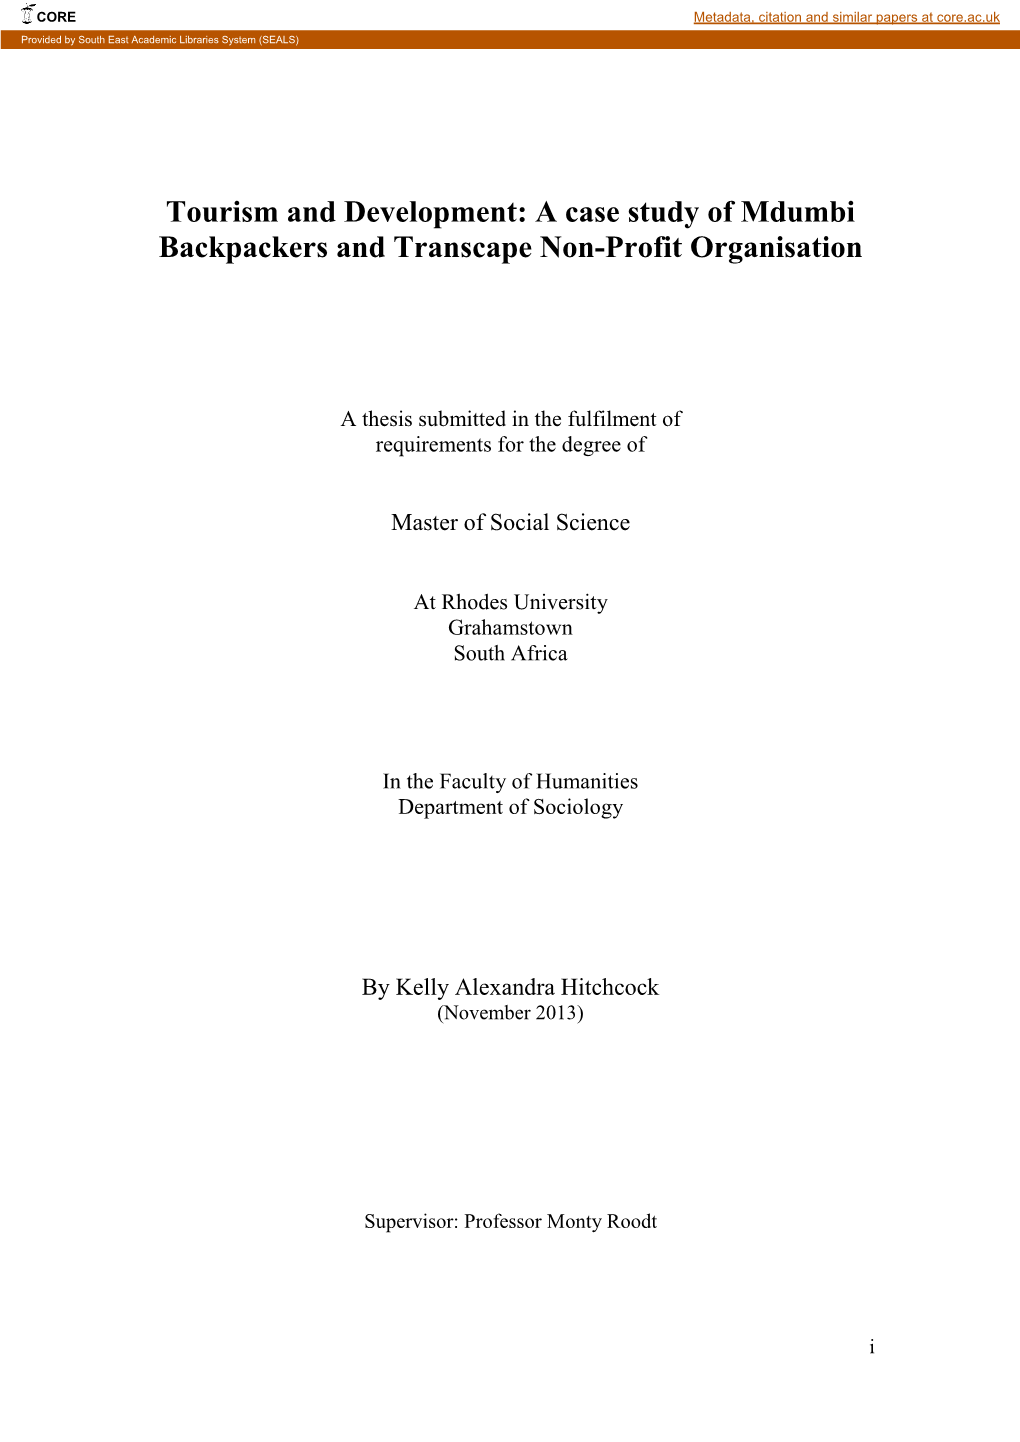 Tourism and Development: a Case Study of Mdumbi Backpackers and Transcape Non-Profit Organisation